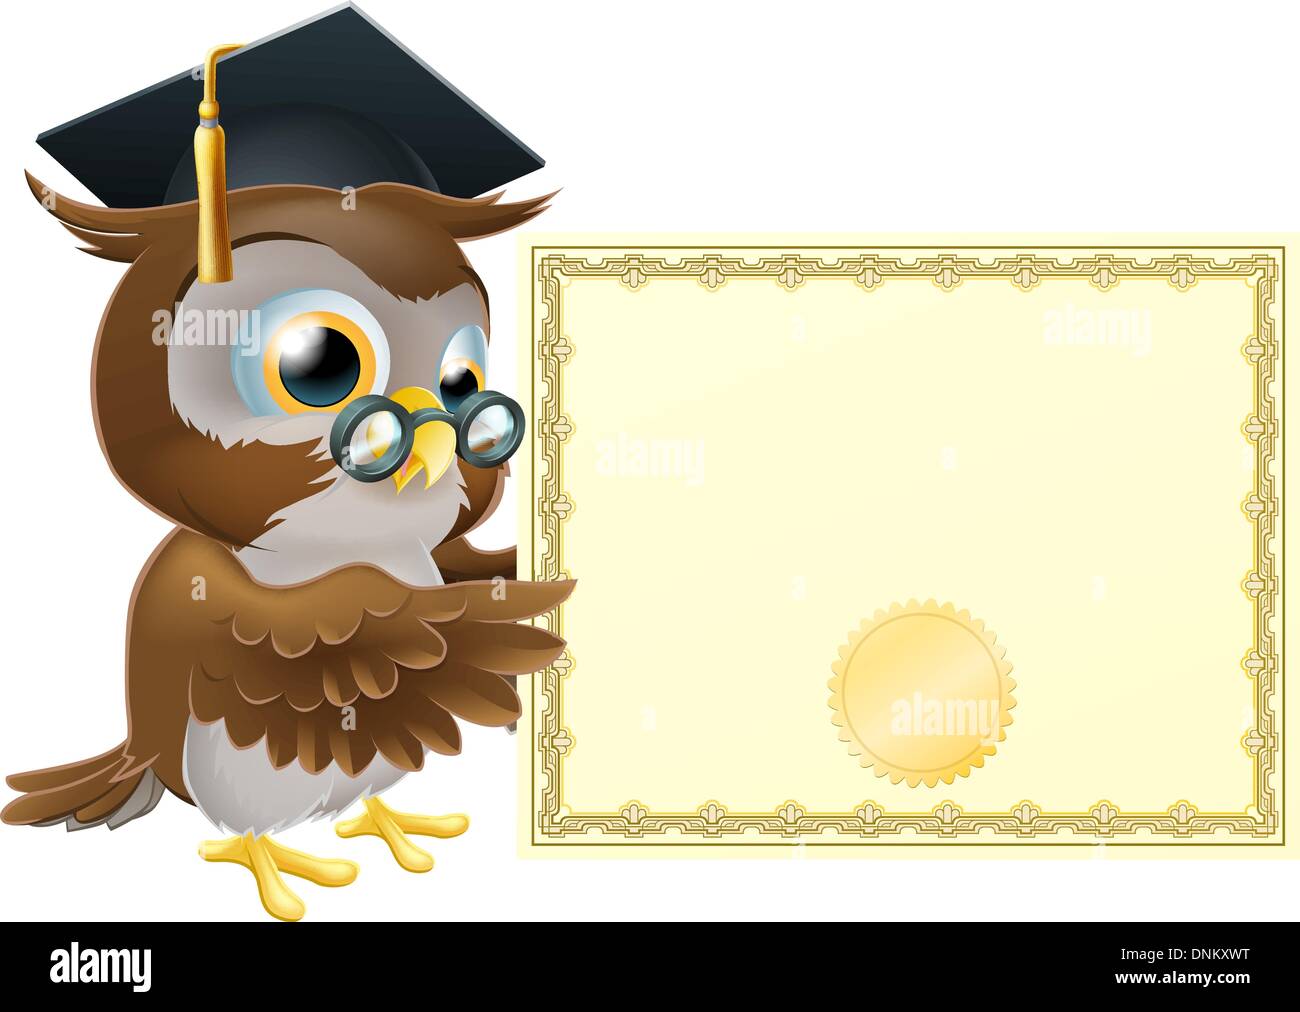 Illustration of a cute owl character in professor's or graduate's mortar board pointing at a diploma certificate background with Stock Vector